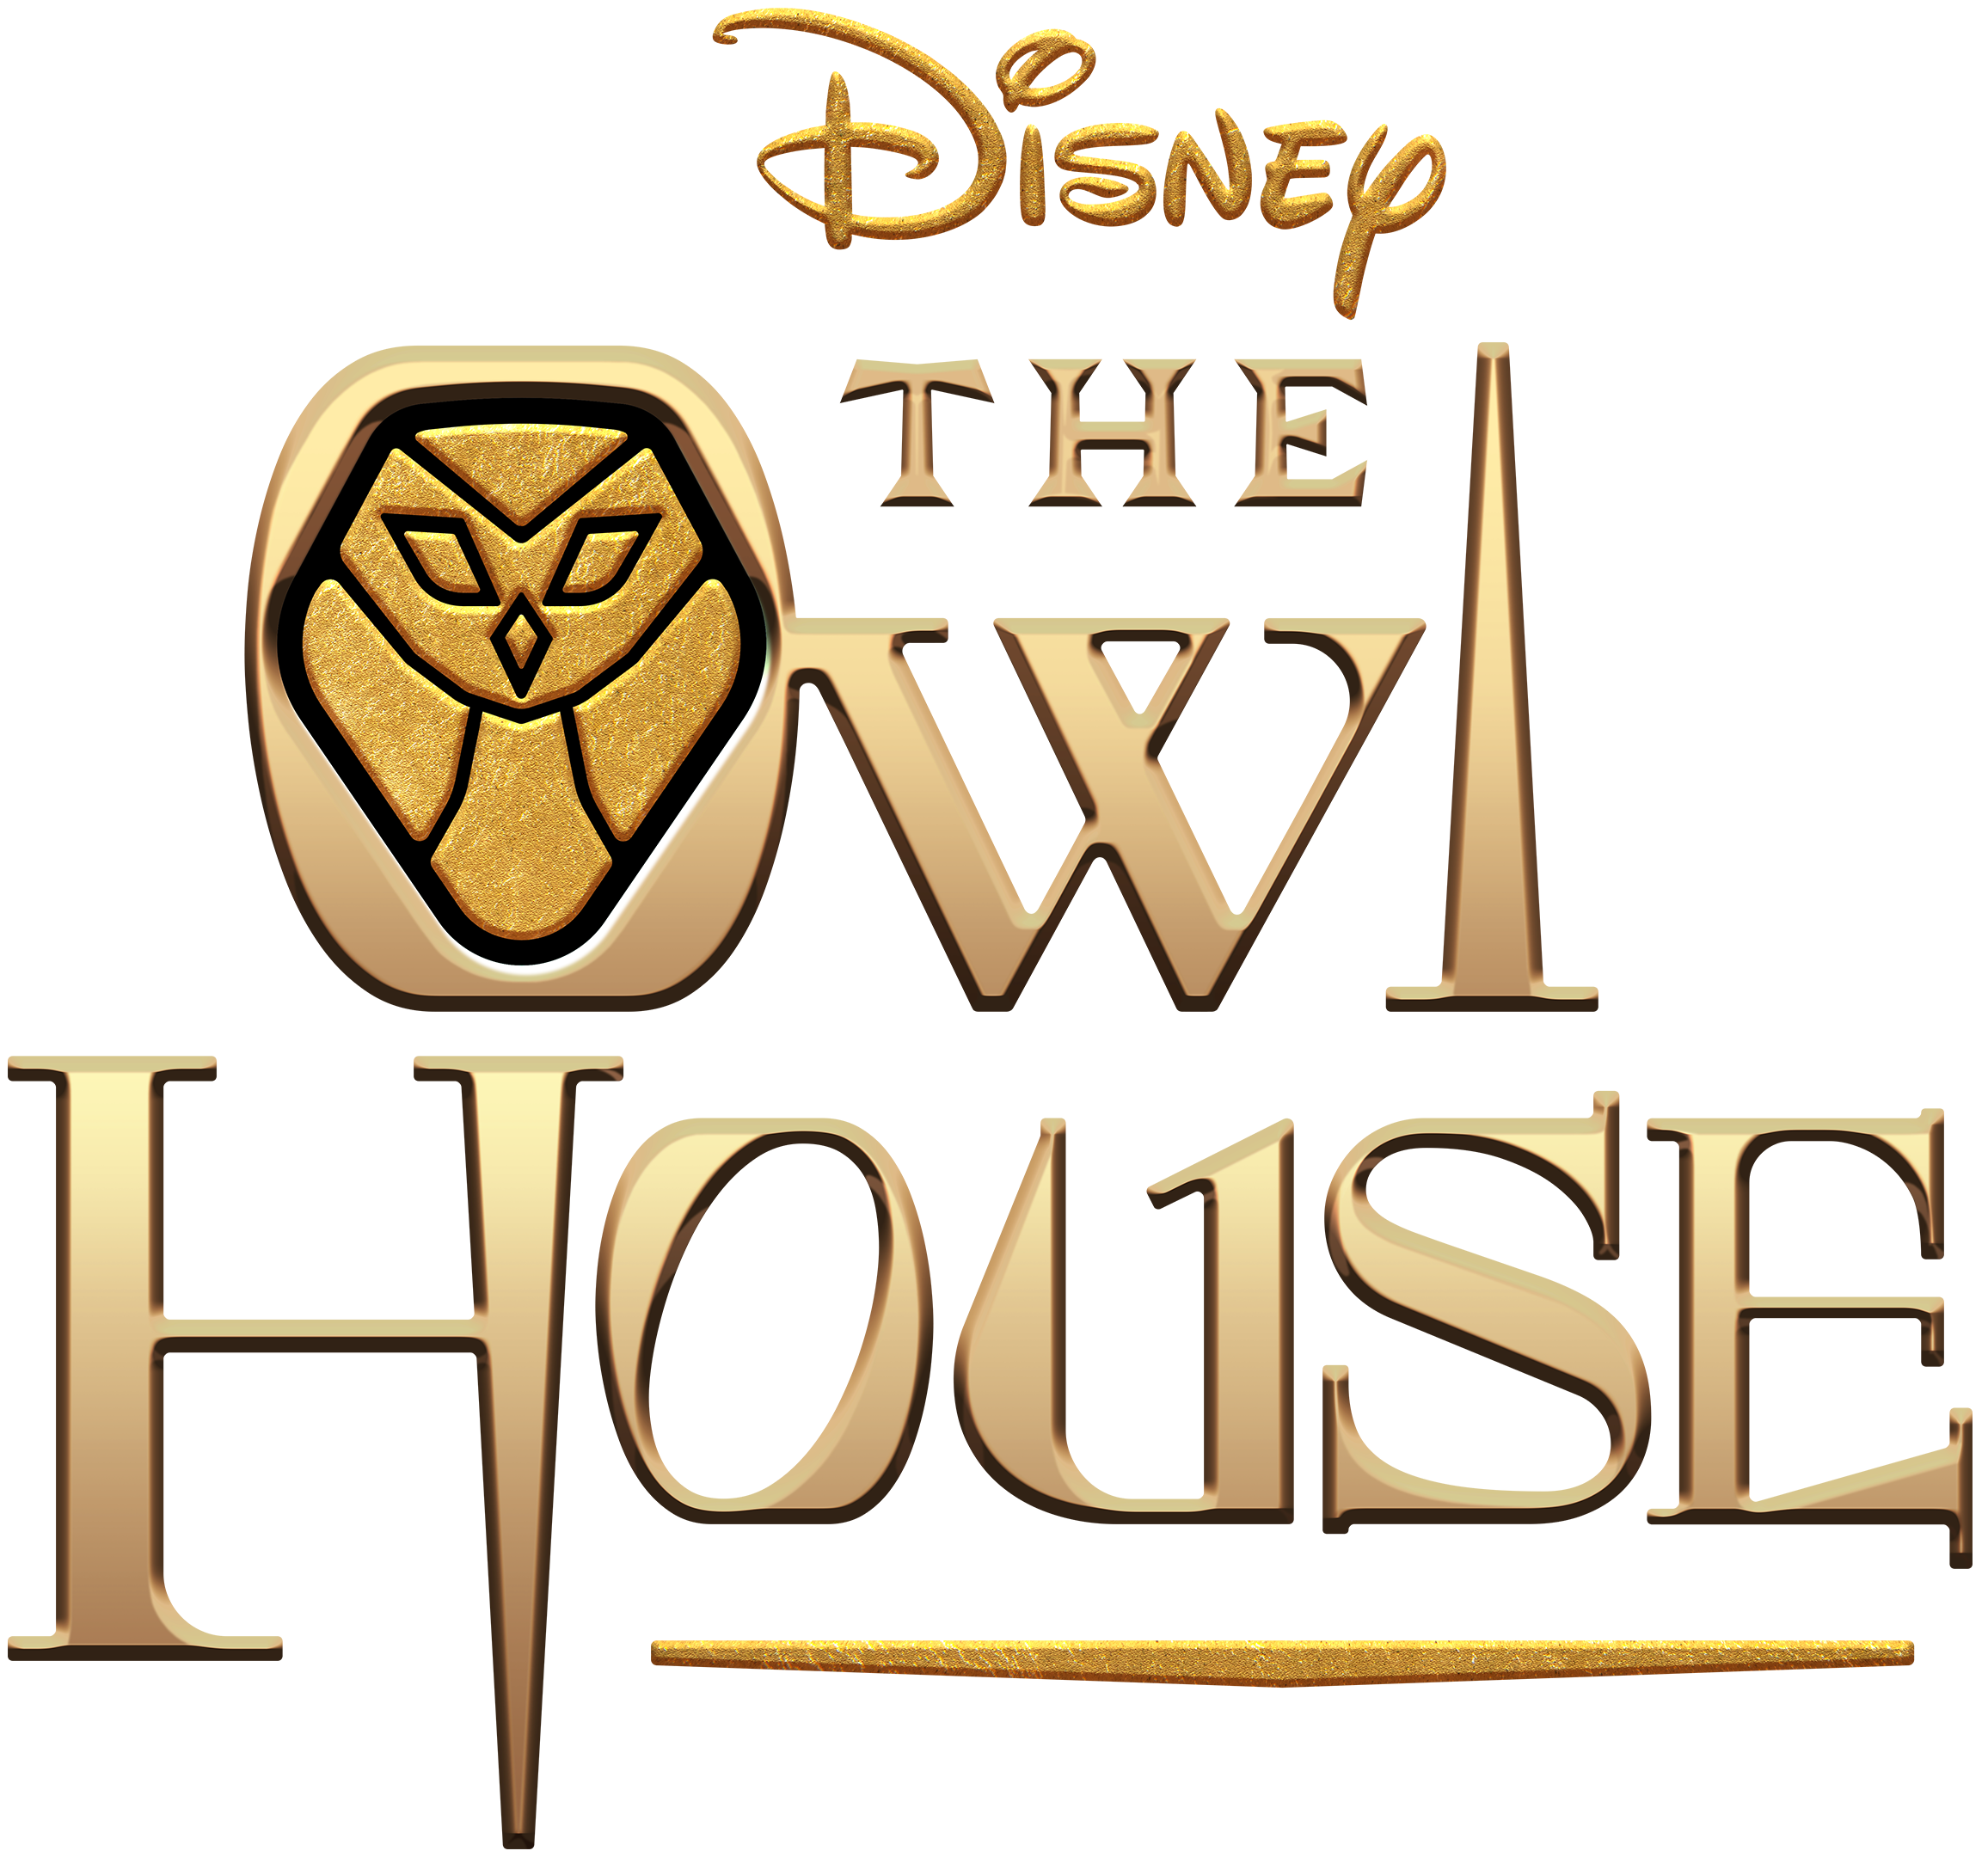 Son of the witch!! — One More Day The owl house season 3!🦉🏡✨ ( I'm so